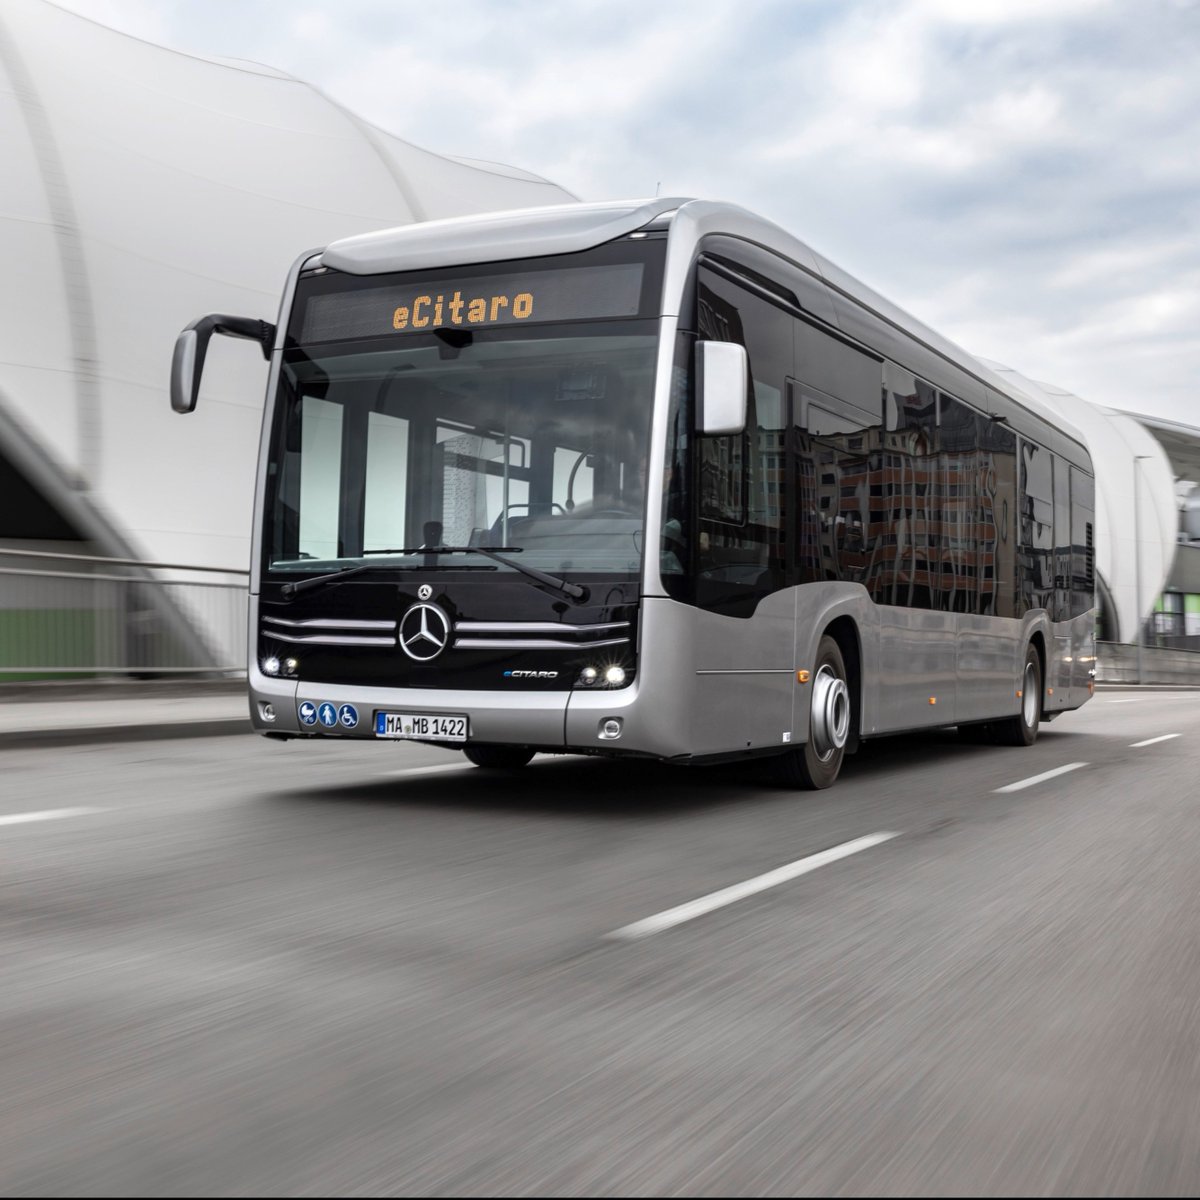 🚌🔋 Full speed ahead for a new electric bus partnership in #Osnabrück: SWO Mobil has chosen #DaimlerBuses as supplier for a total of 19 new, fully #electric & locally emission-free Mercedes-Benz #eCitaro buses.

Read more: dth.ag/SWO

#DaimlerTruck #FutureMoves